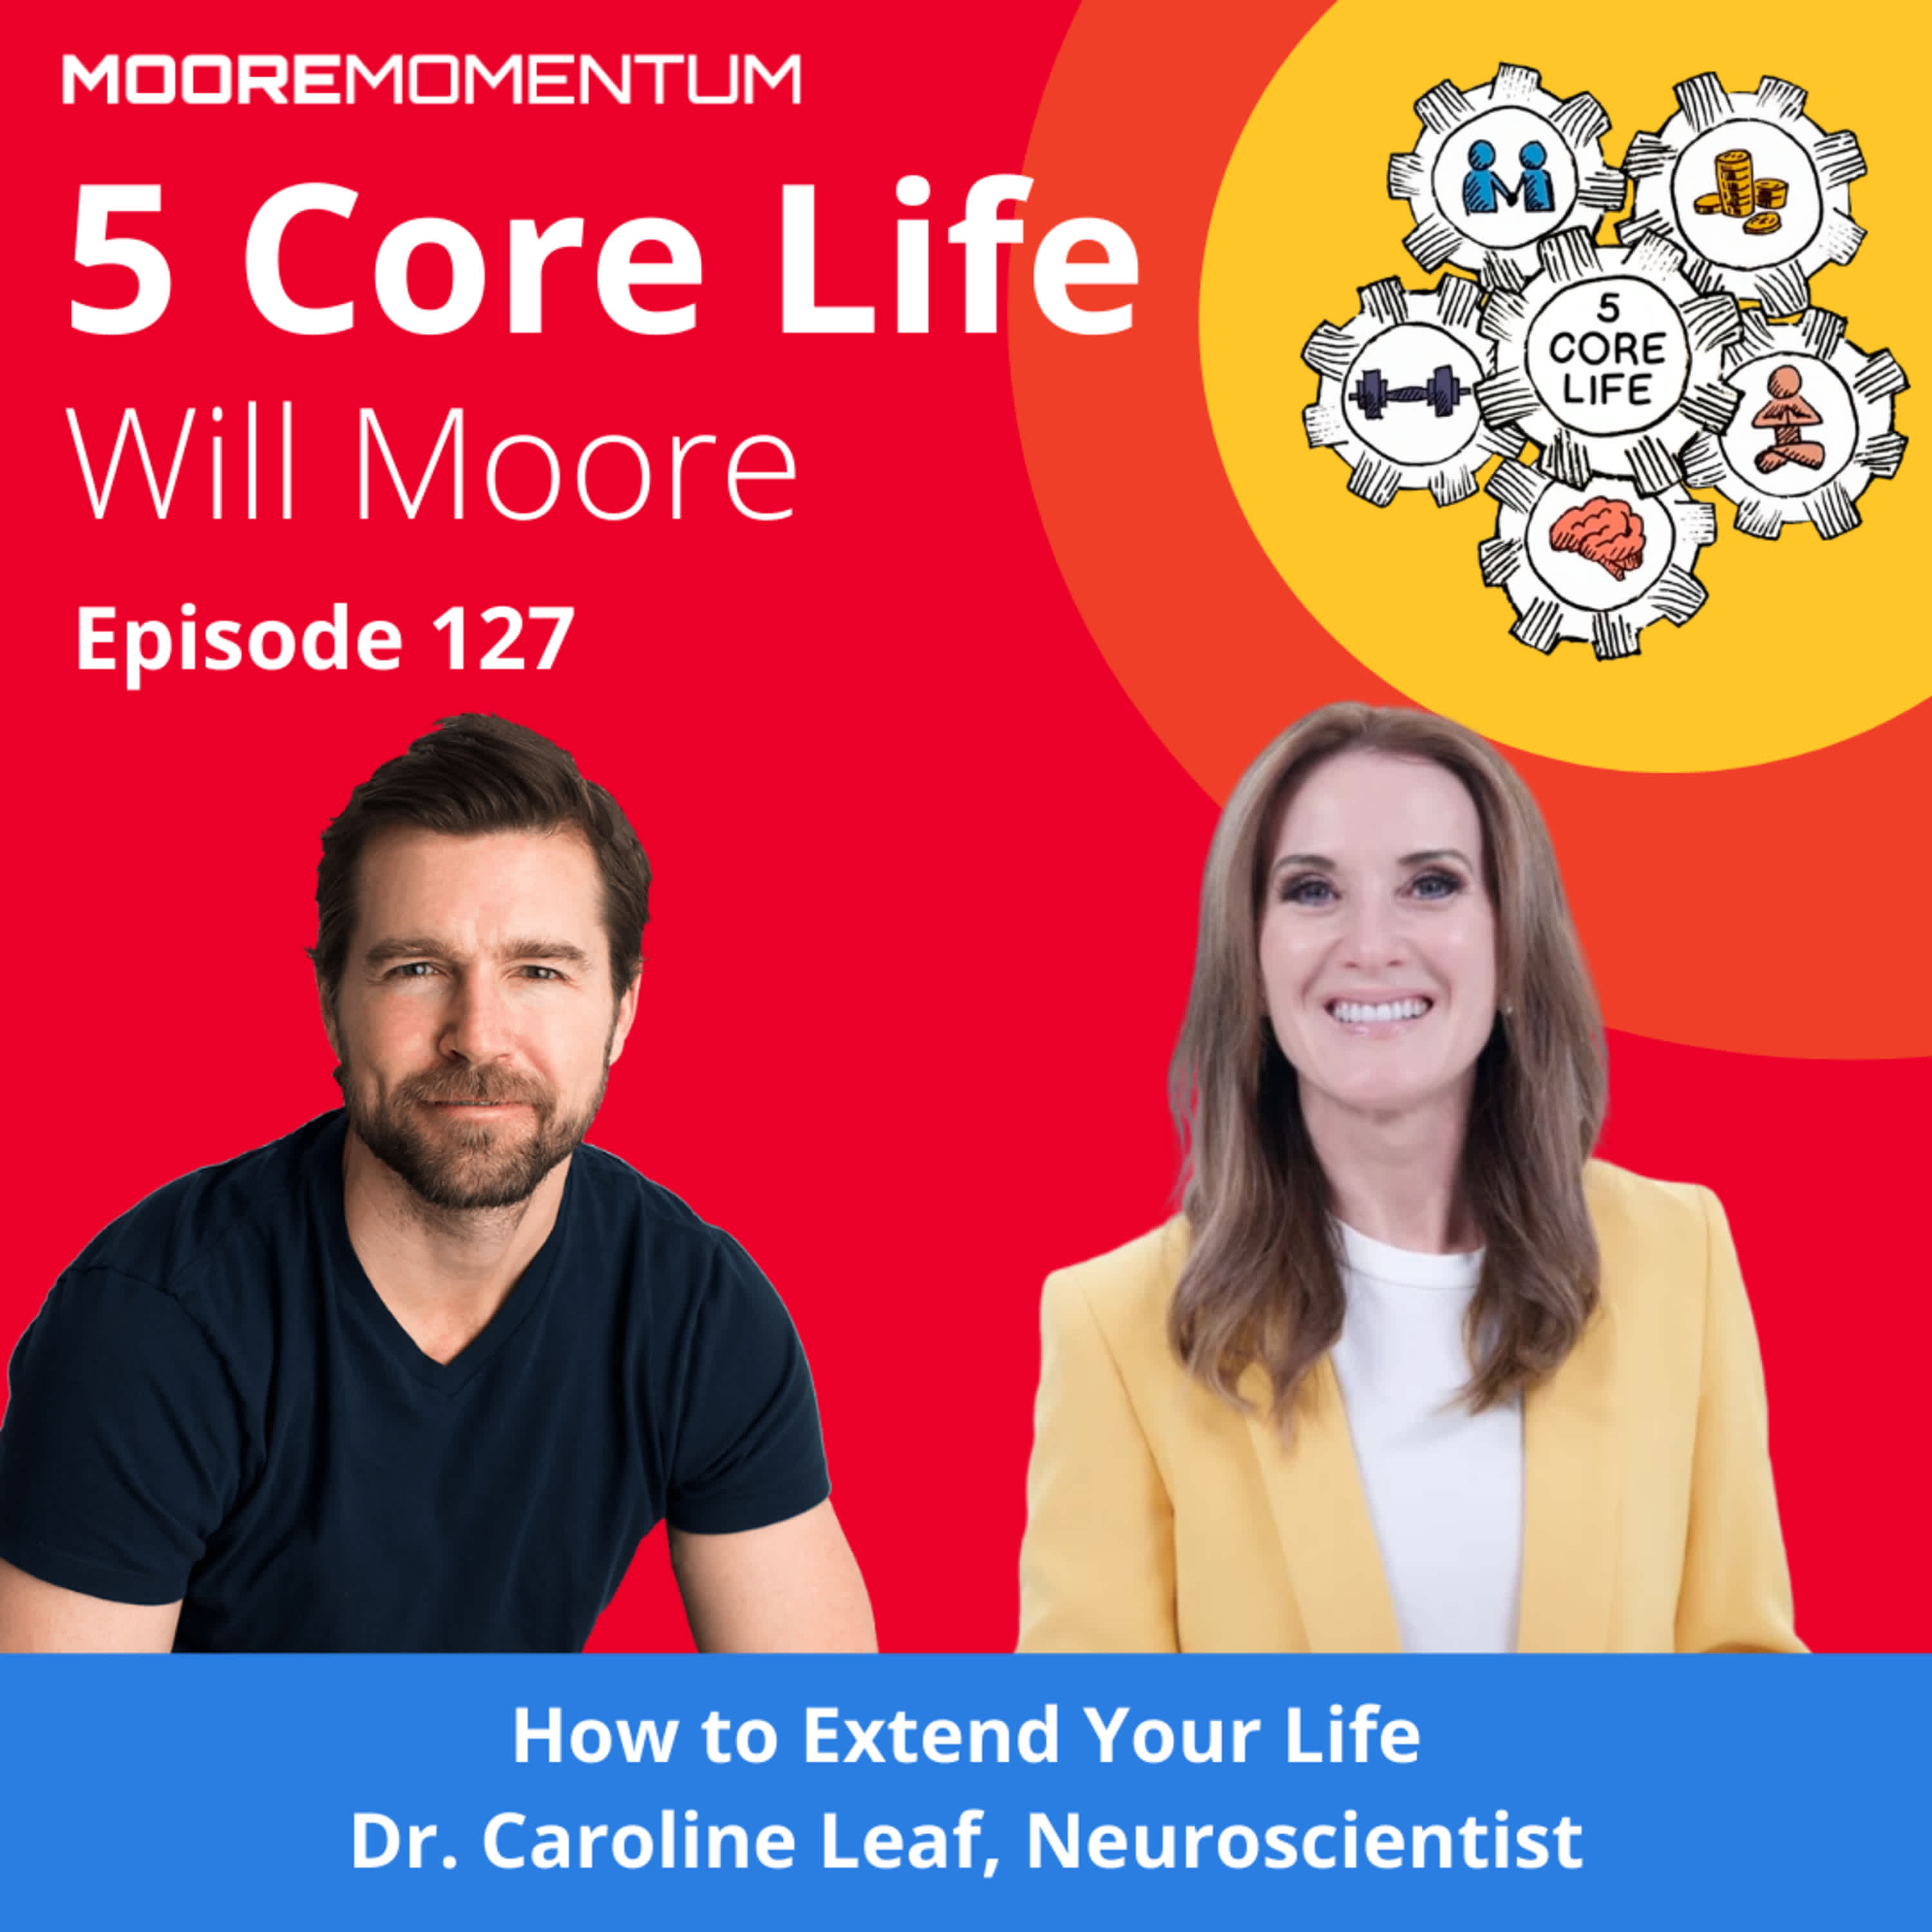 How to Extend Your Life Through Deep Thinking and Improving Your Mindset | Dr. Caroline Leaf